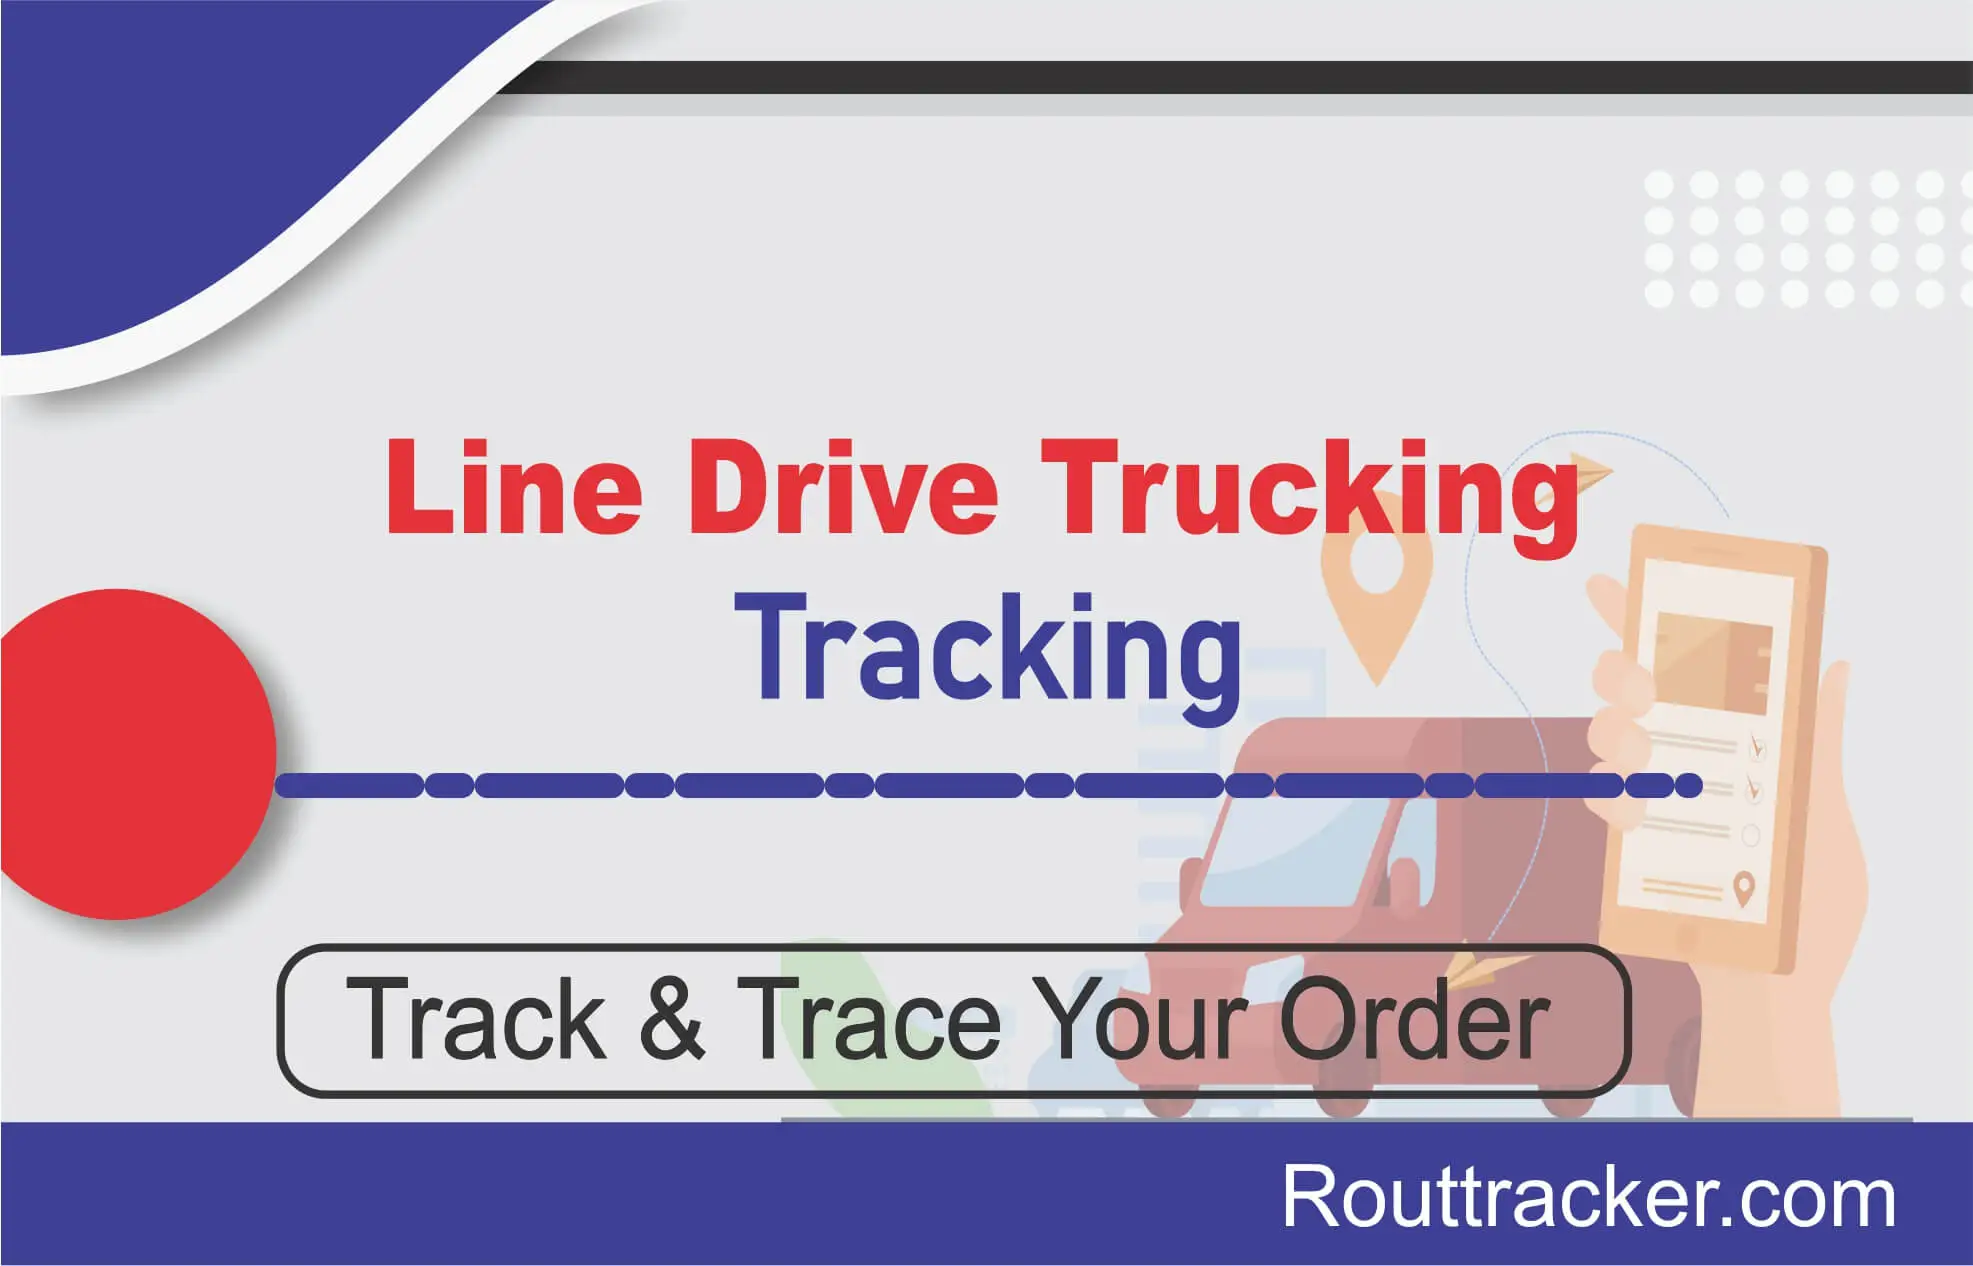 Line Drive Trucking Tracking